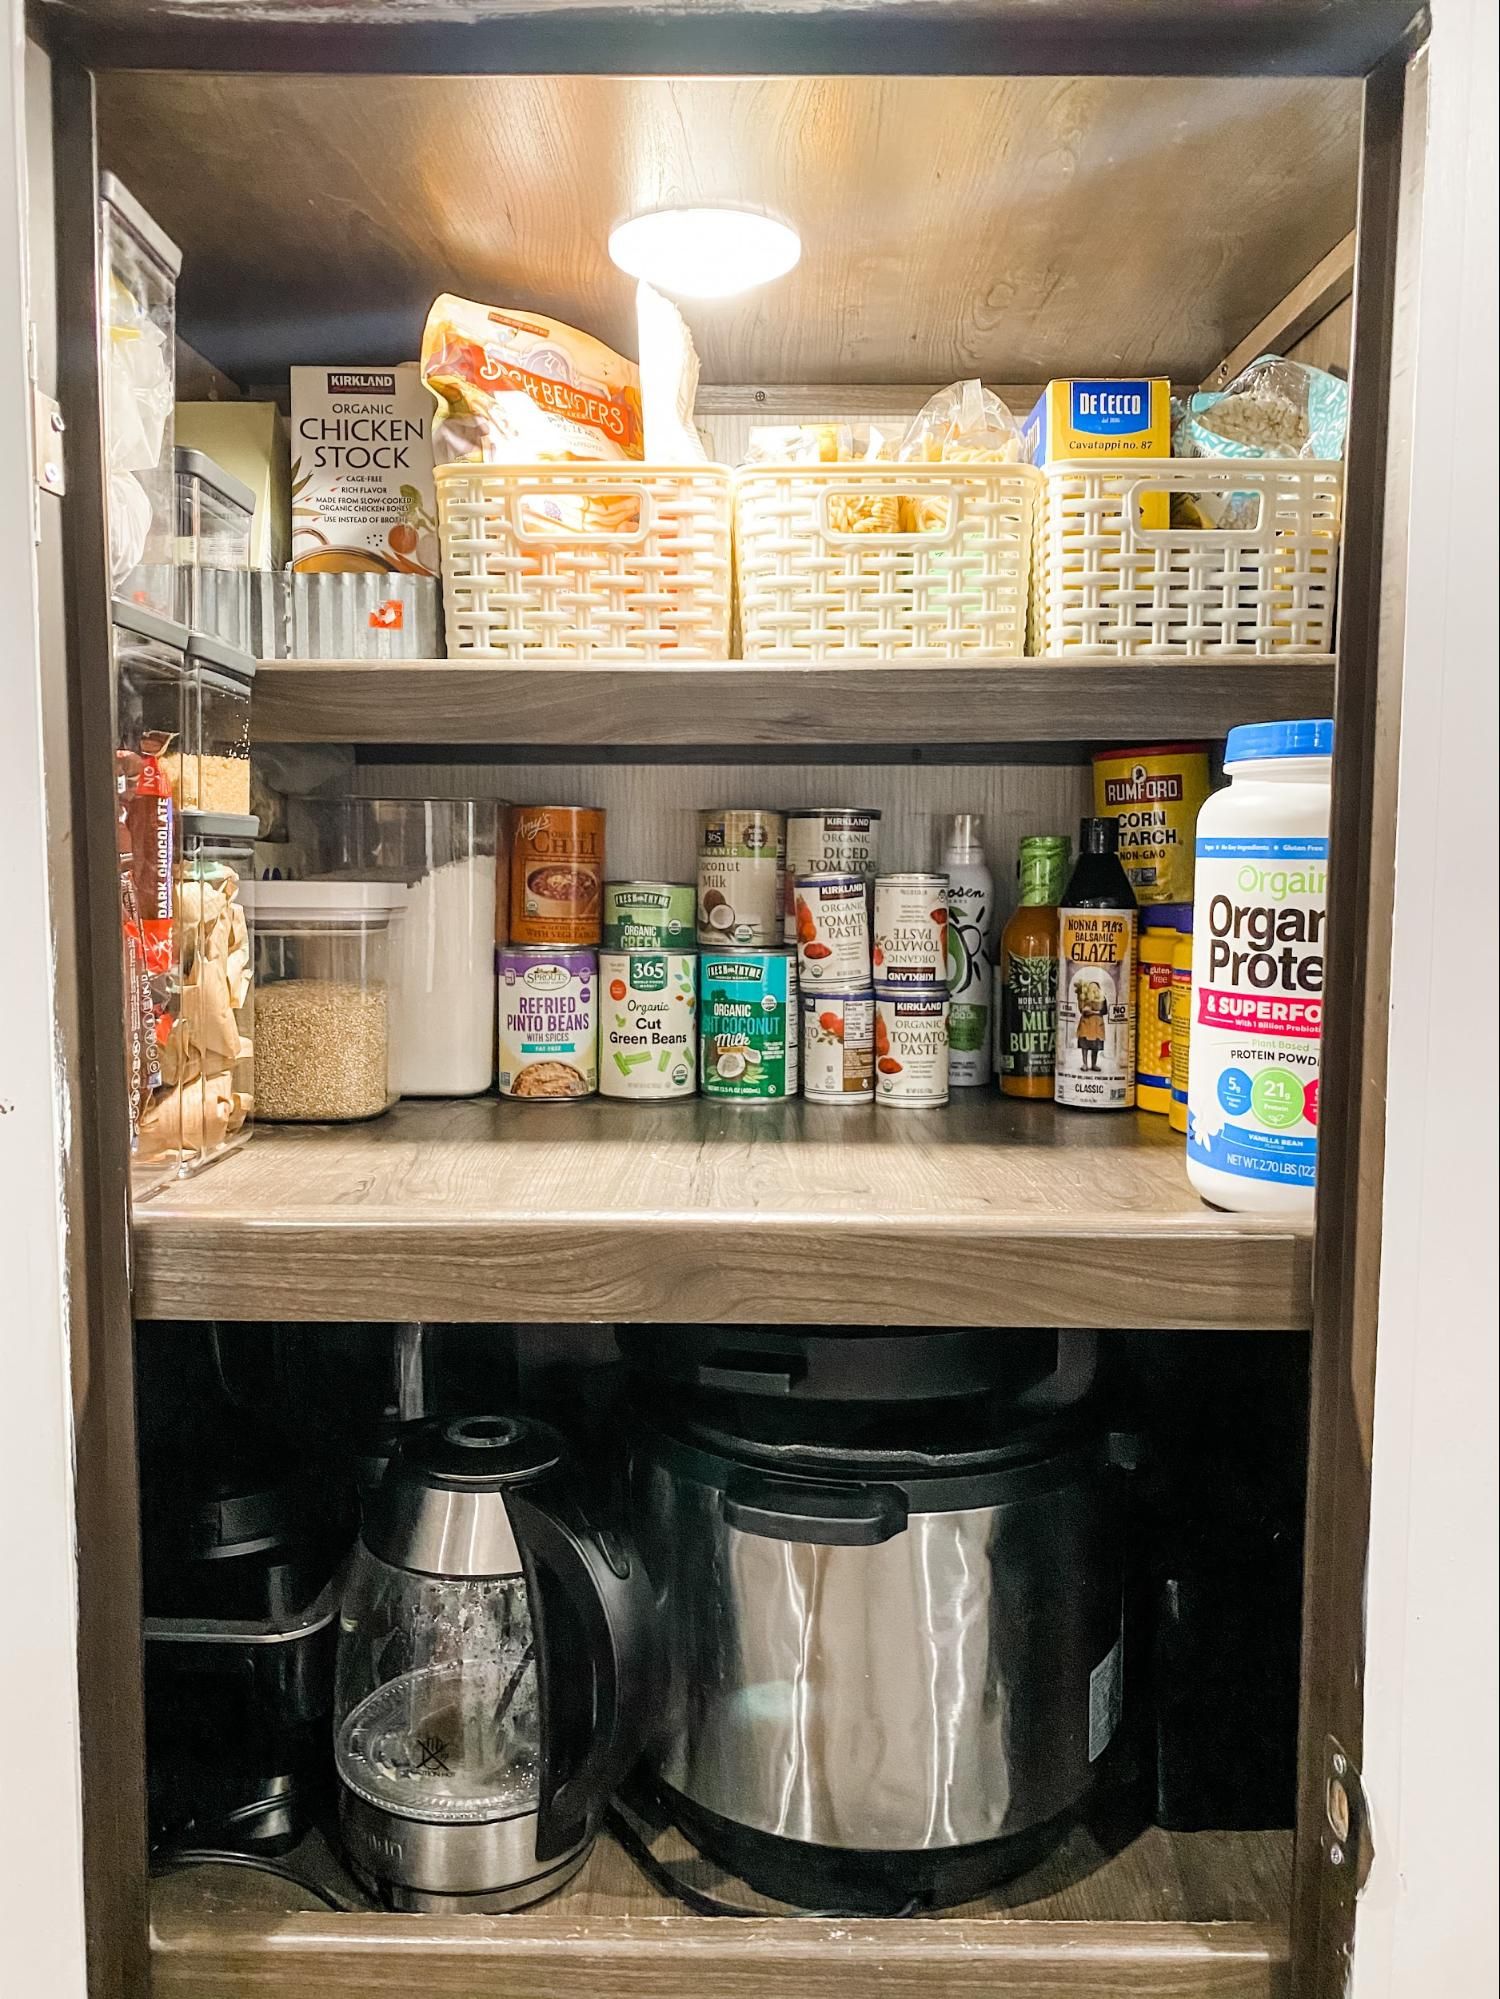 A neatly organized RV pantry showing plastic baskets grouping like items.